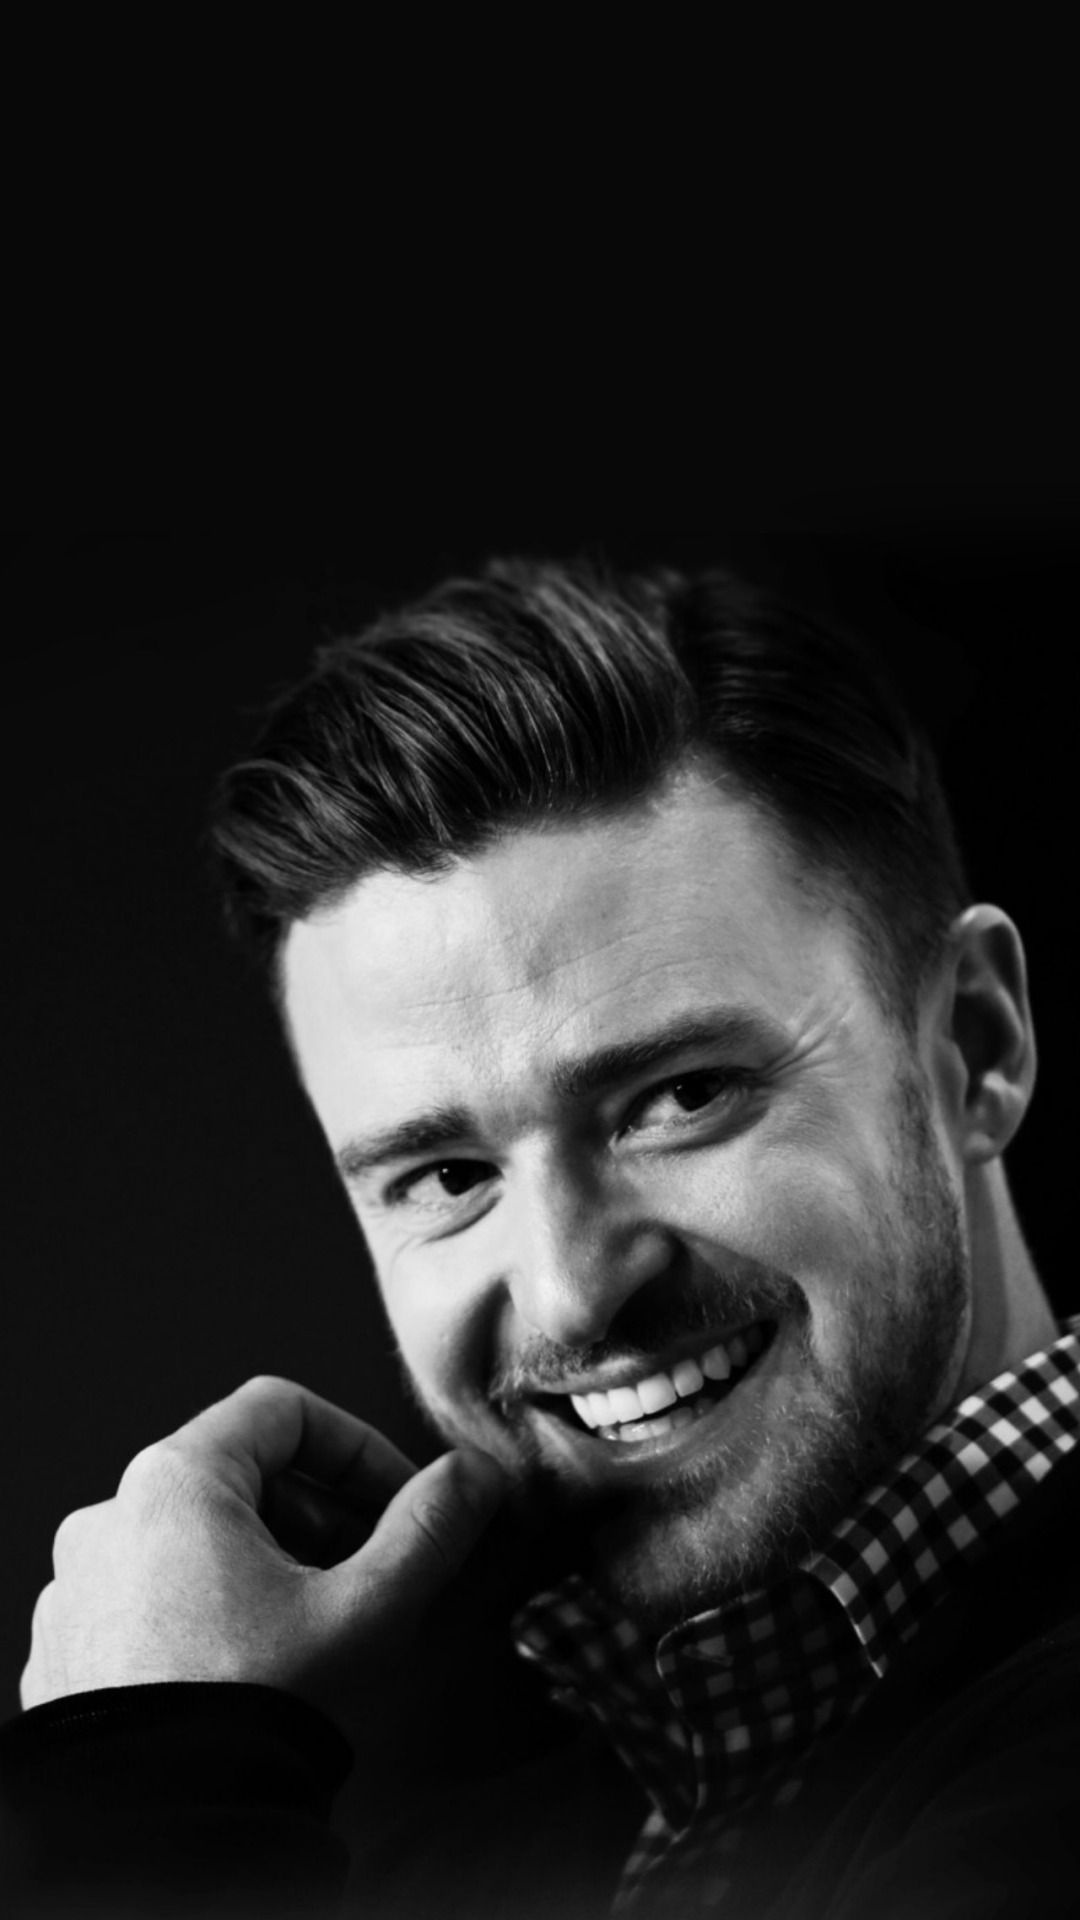 Justin Timberlake, Jessica Biel, Aesthetic wallpapers, All in one, 1080x1920 Full HD Handy